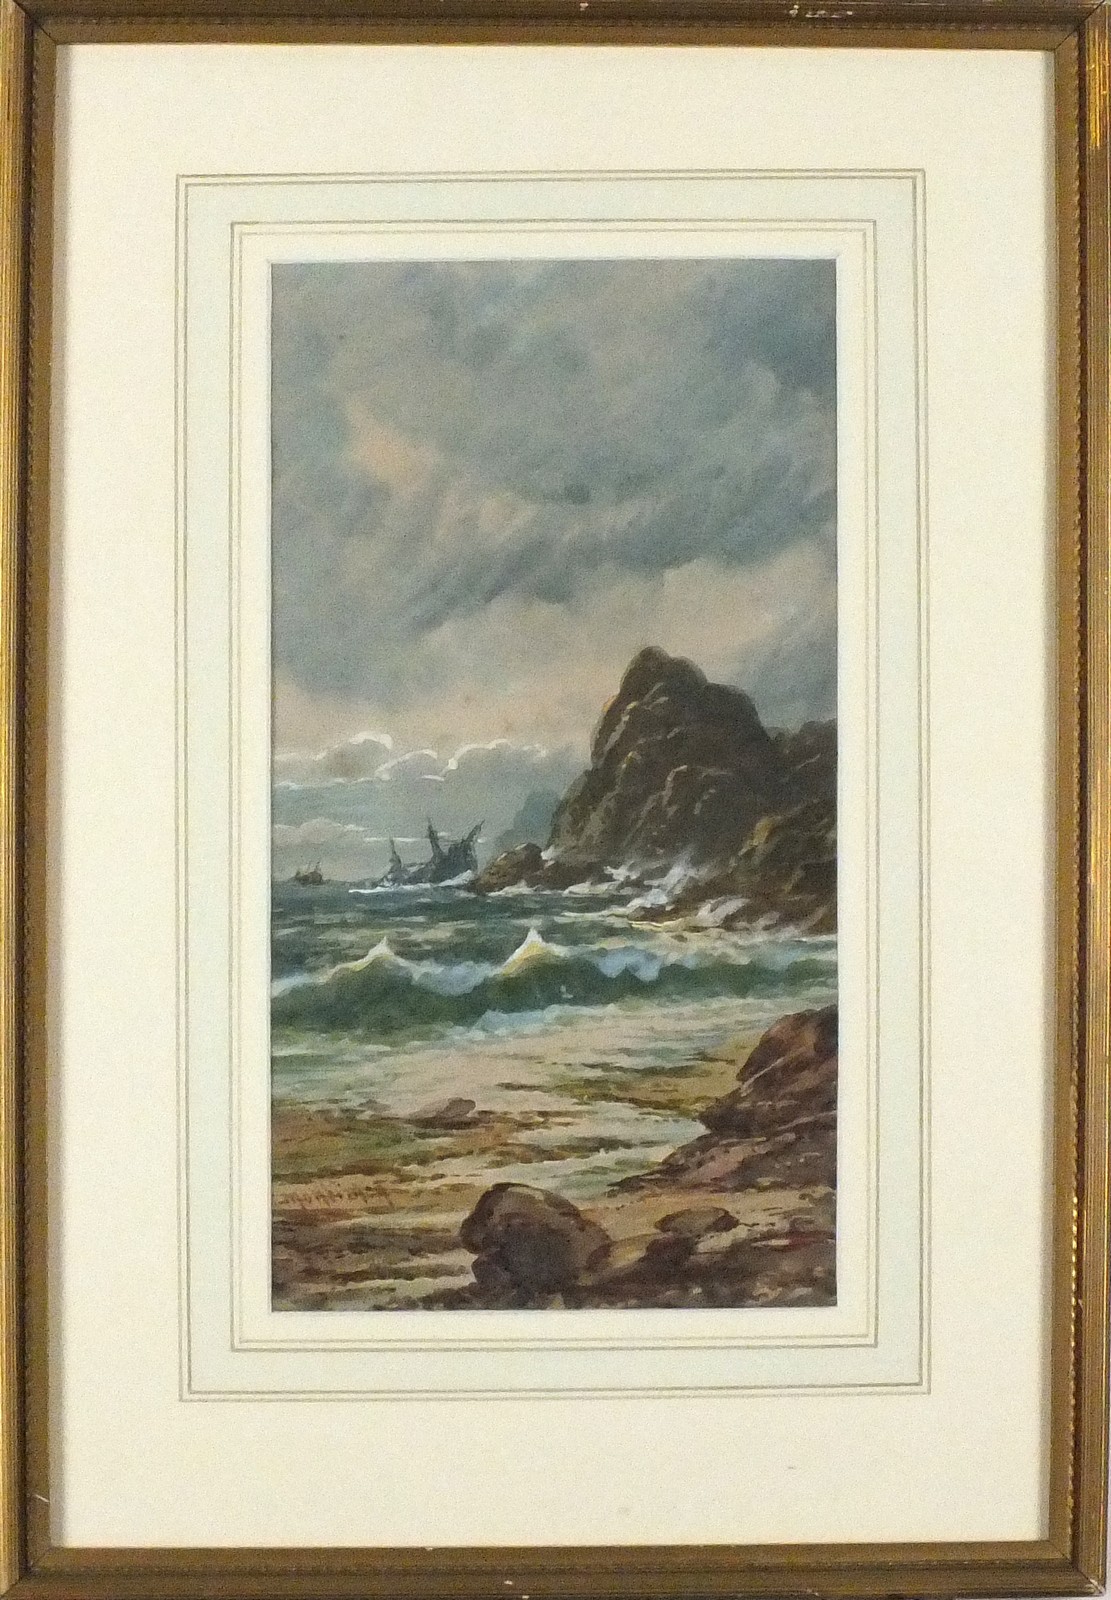 Lewis MORTIMER (British fl 1900-1930) Foundering Vessel of the Cornish Coast, Watercolour, Signed - Image 2 of 2